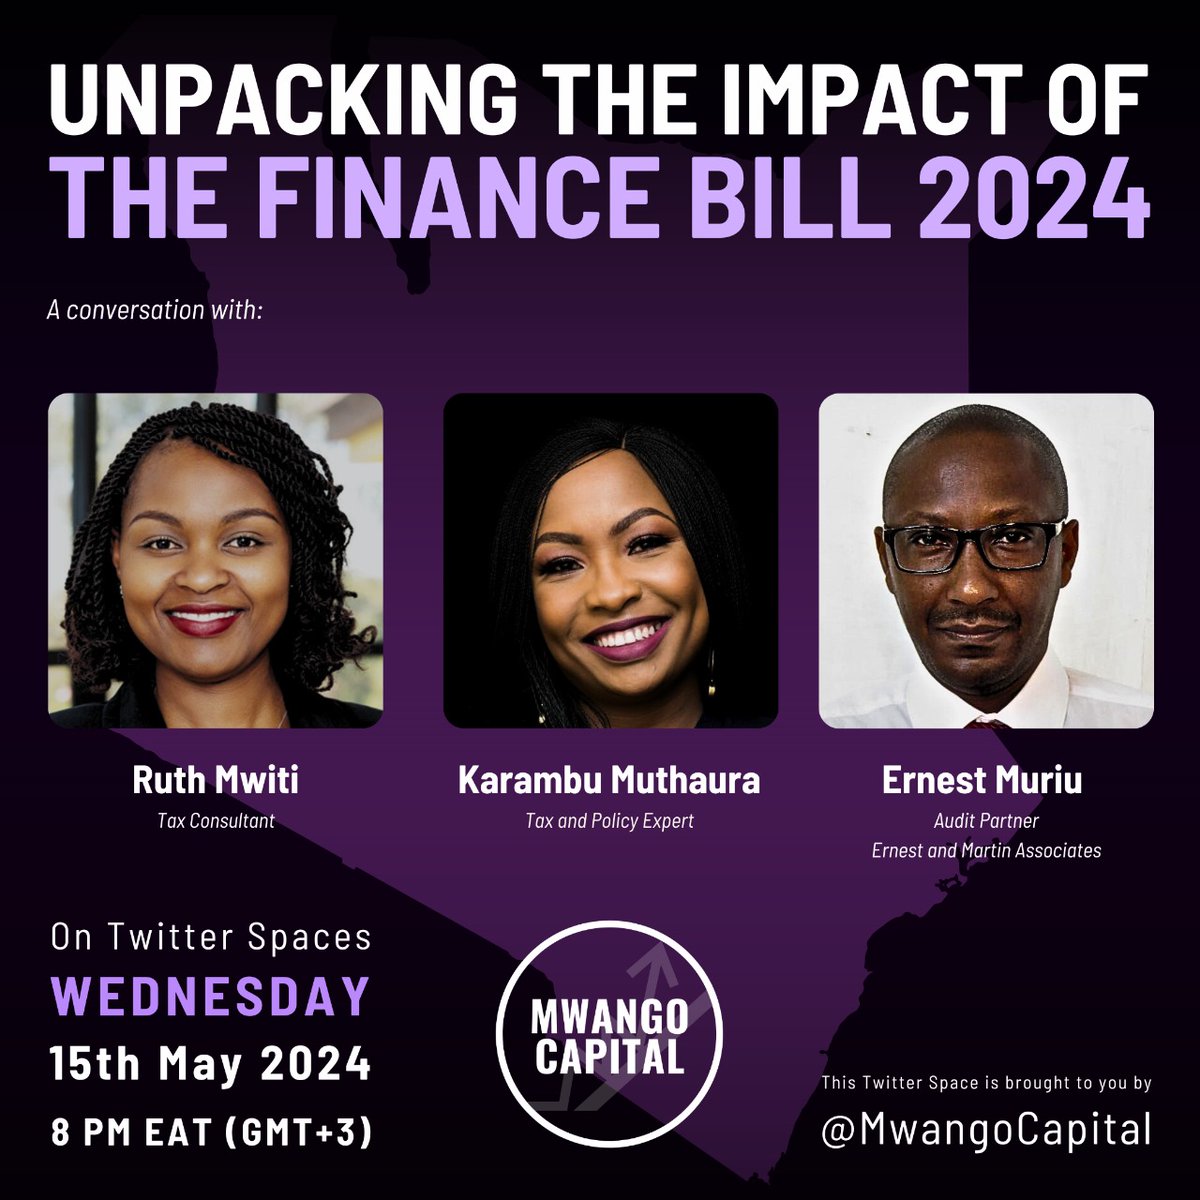 Today on #mwangospaces at 8pm EAT we unpack the key takeaways from the Finance Bill 2024. Our tax experts will be: —Ruth mwiti [@ruthmwiti2] —Ernest muriu [@muriu_ernest] —Karambu muthaura [@karambu] Any questions you might have for our panel ahead of the space?